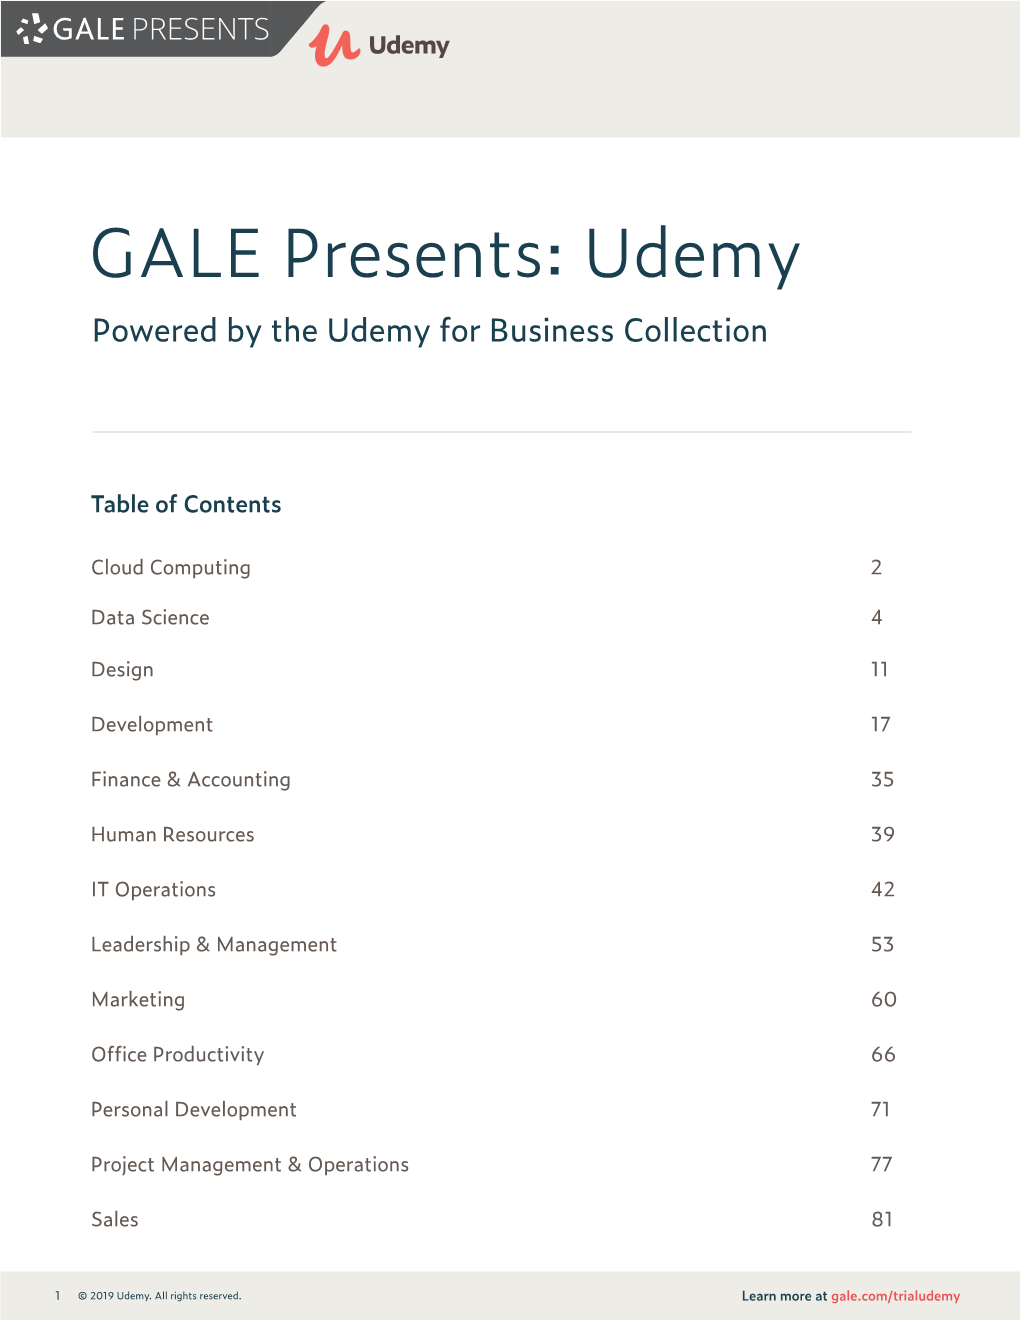 GALE Presents: Udemy Powered by the Udemy for Business Collection